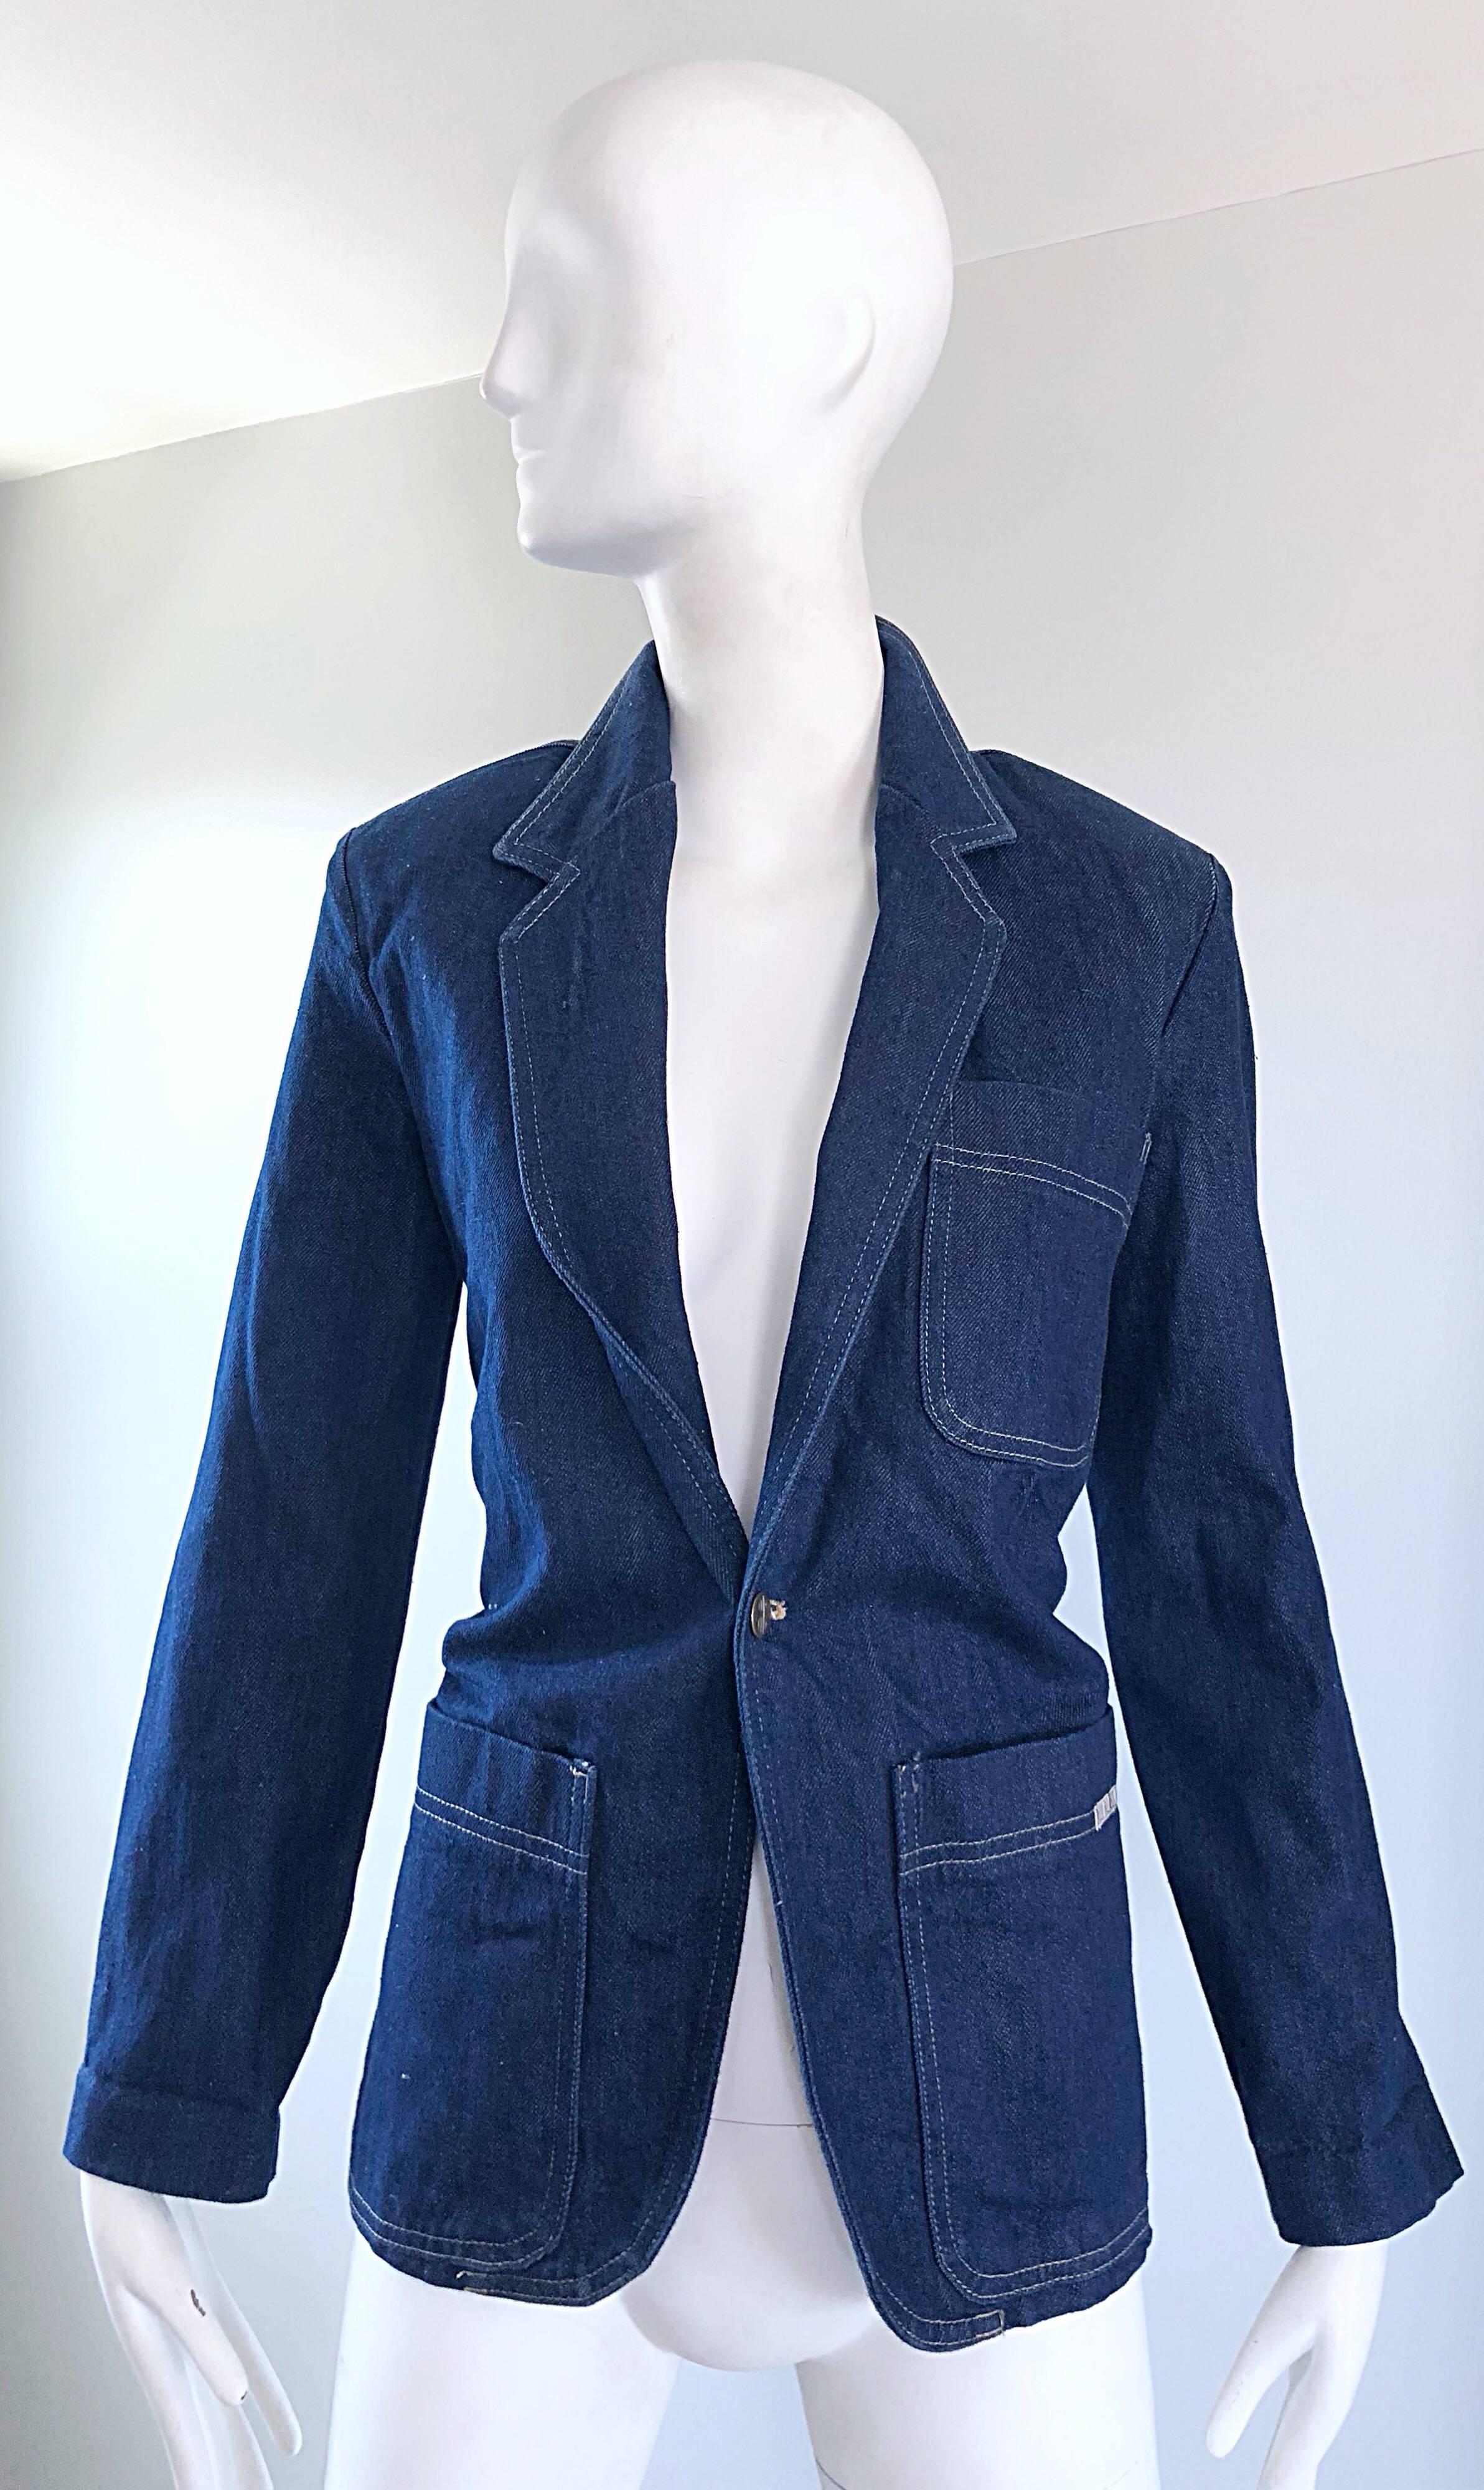 Fabulous classic vintage 80s  BILL BLASS dark denim blue jean boyfriend blazer jacket! Sharp tailored fit with a single brass Bill Blass embossed button. Pocket at left breast and at each side of the waist. Perfect weight for any time of year. In